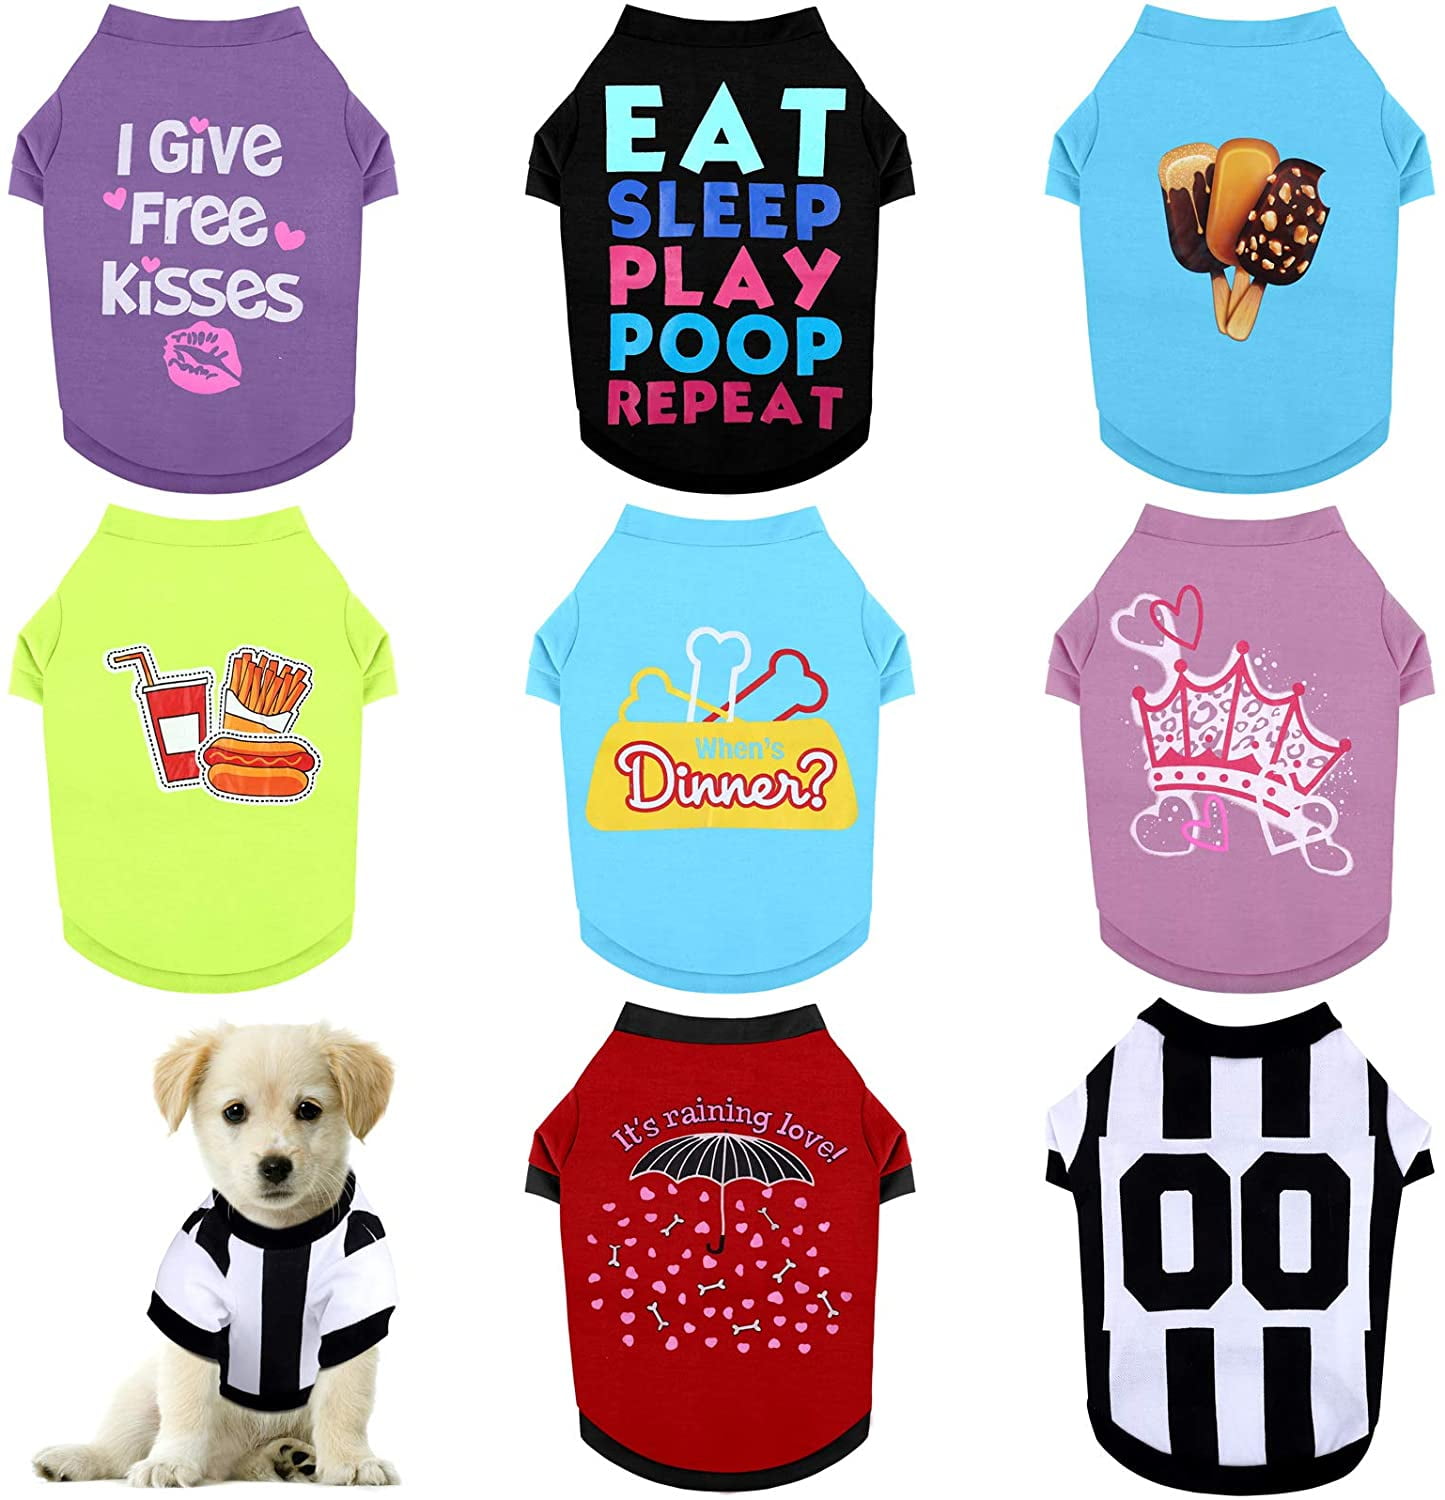 HYLYUN 6 Pieces Printed Girl Puppy Shirt Soft Breathable Pet T-Shirt Puppy Dog Clothes Soft Sweatshirt for Small Dogs and Cats 